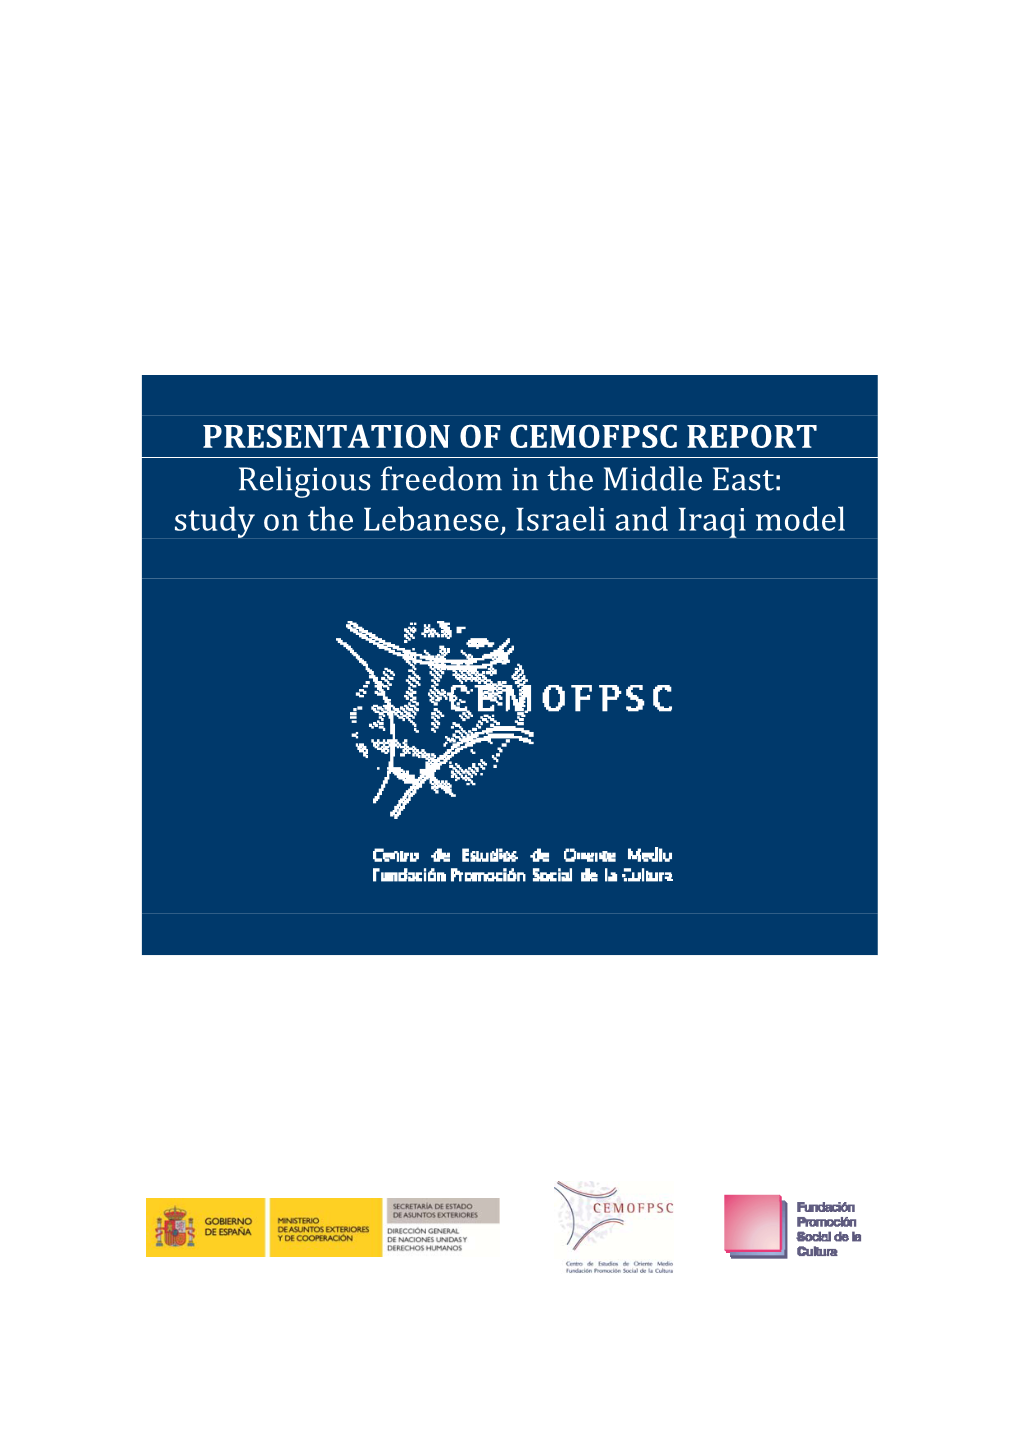 PRESENTATION of CEMOFPSC REPORT Religious Freedom in the Middle East: Study on the Lebanese, Israeli and Iraqi Model